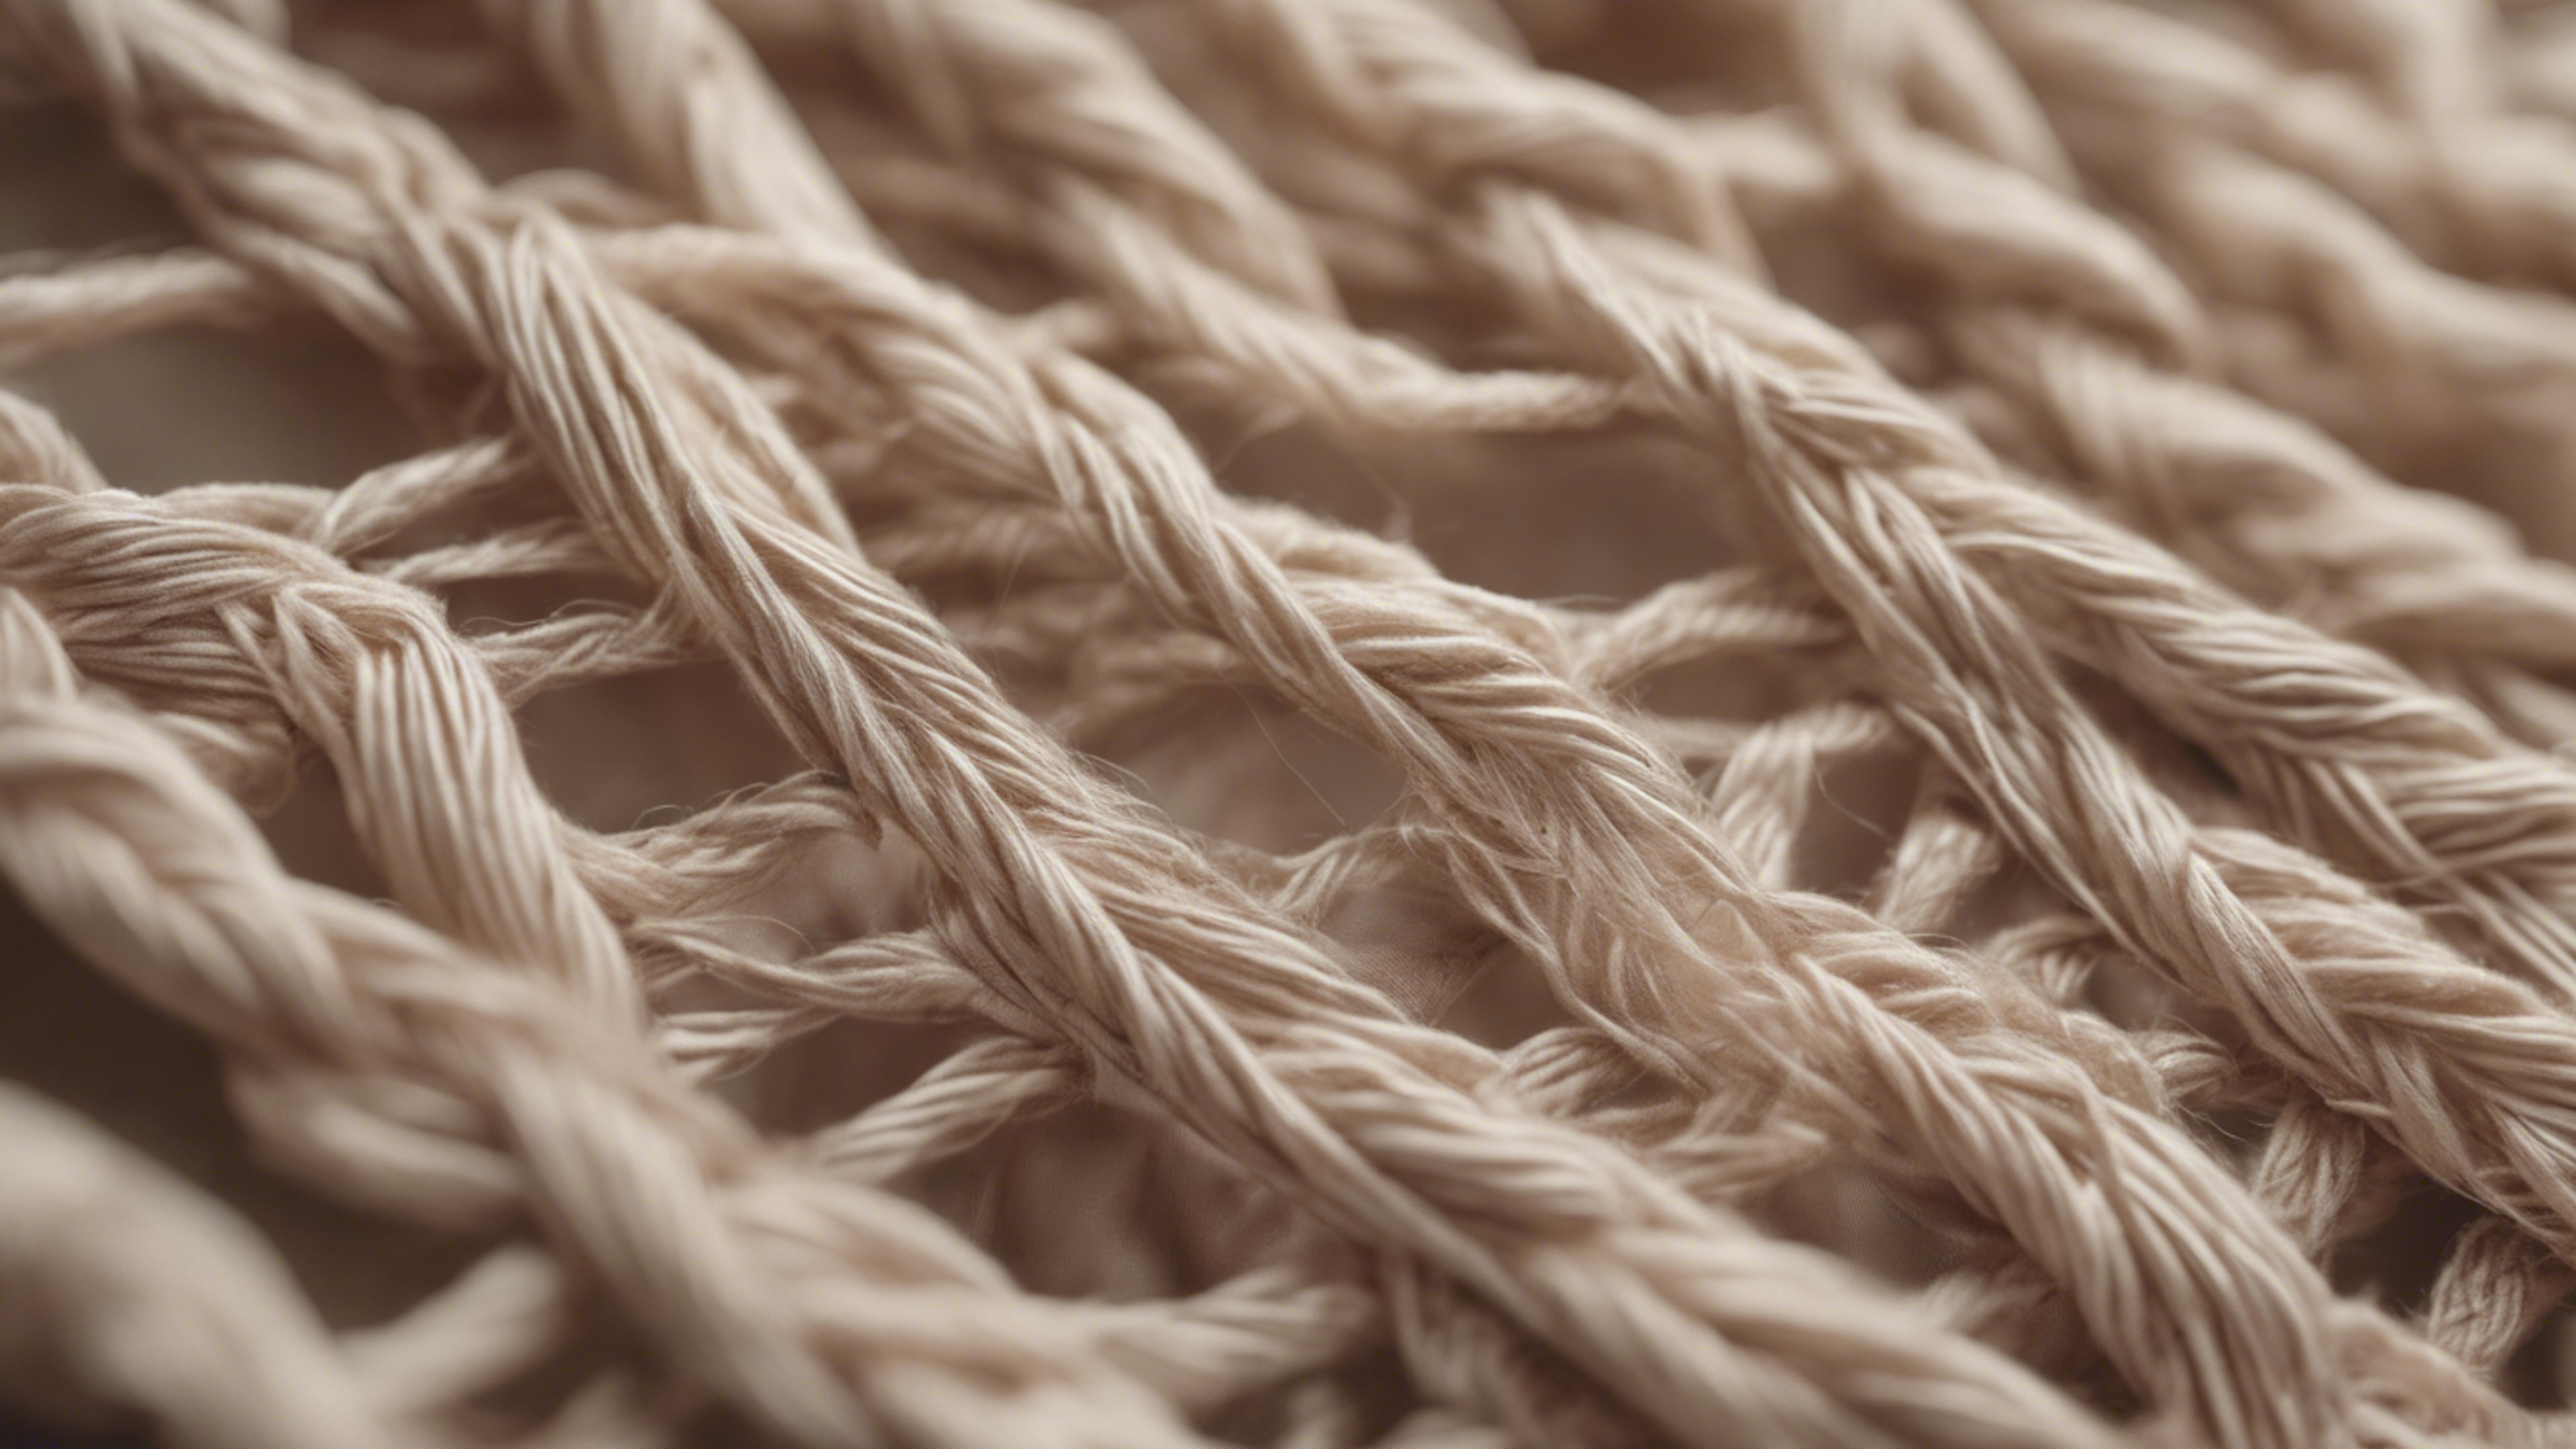 A close-up of cool beige threads interweaving to form a unique, patterned fabric. ផ្ទាំង​រូបភាព[e47f0bd142b54d48a5a0]